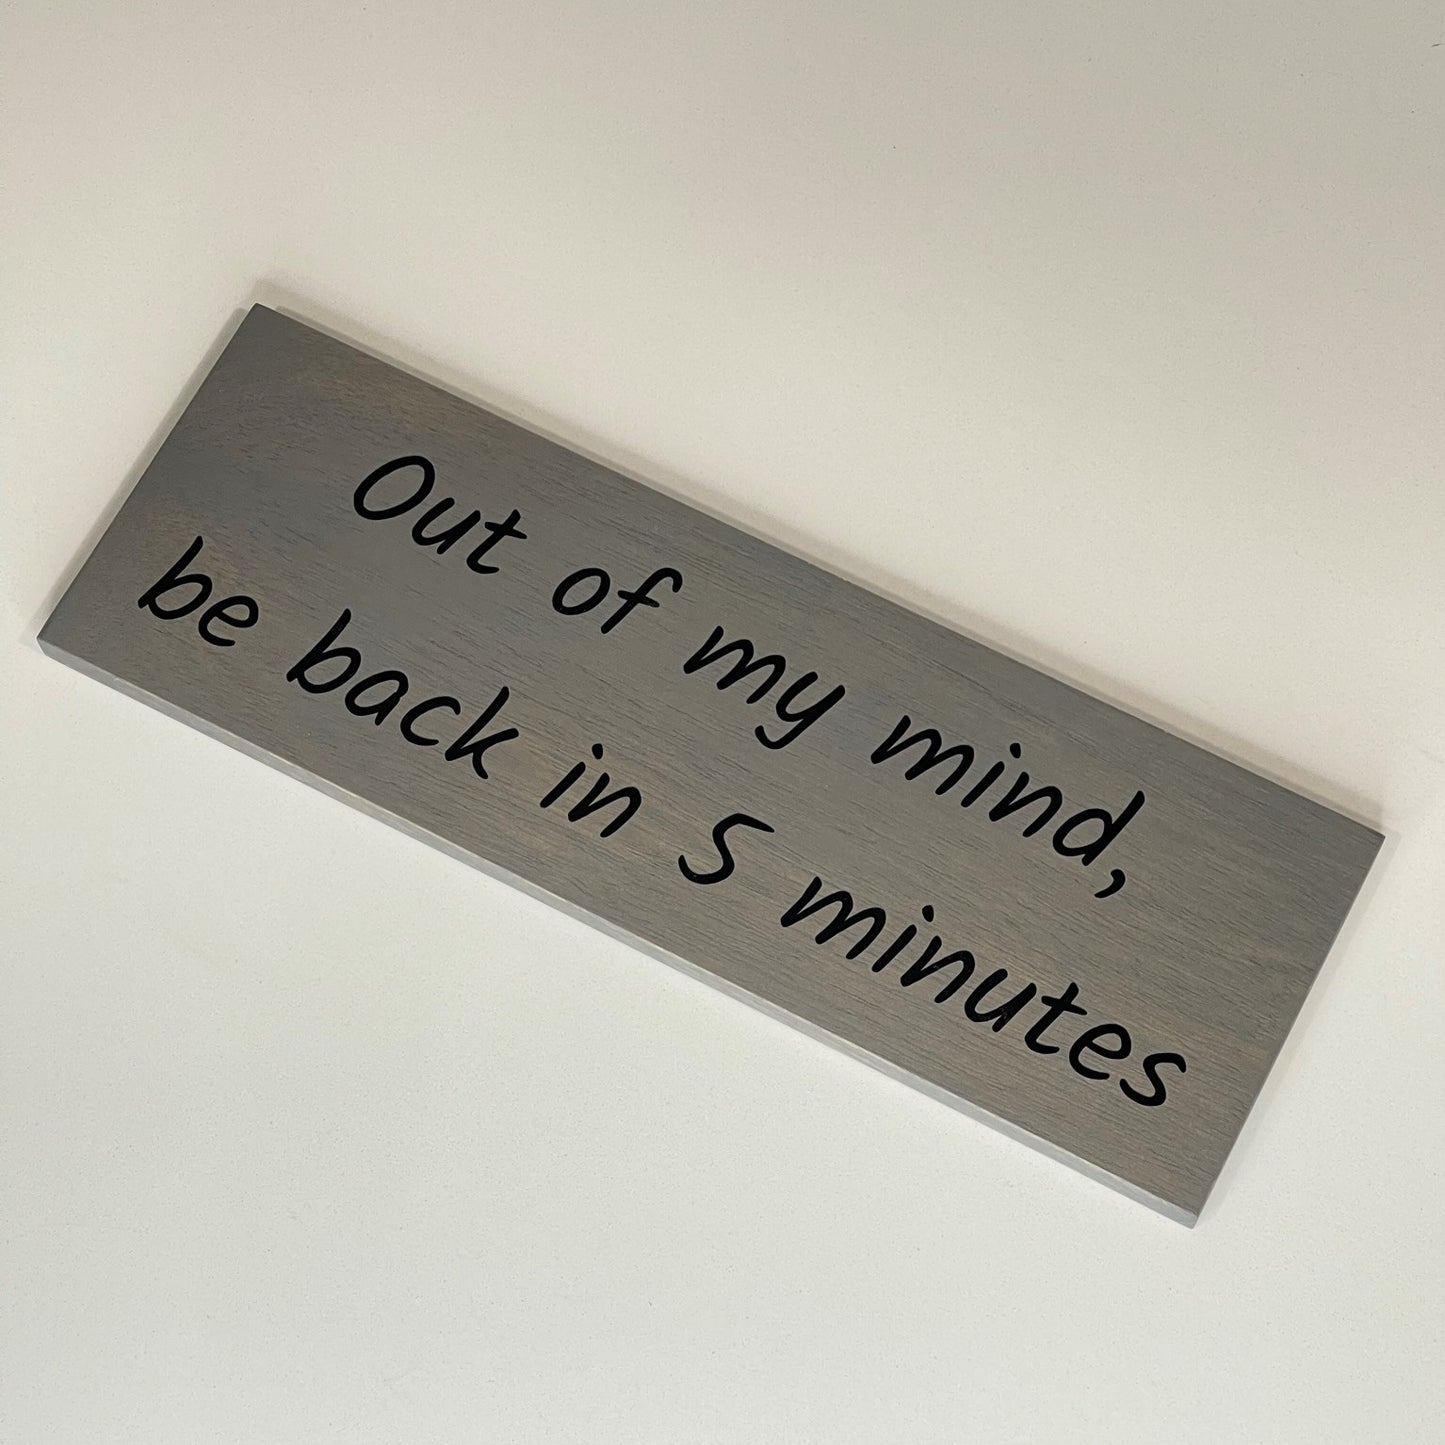 Out of My Mind, be Back in 5 Minutes - Funny Sign - Wall Decor - Bar Wall Art - Wooden Sign